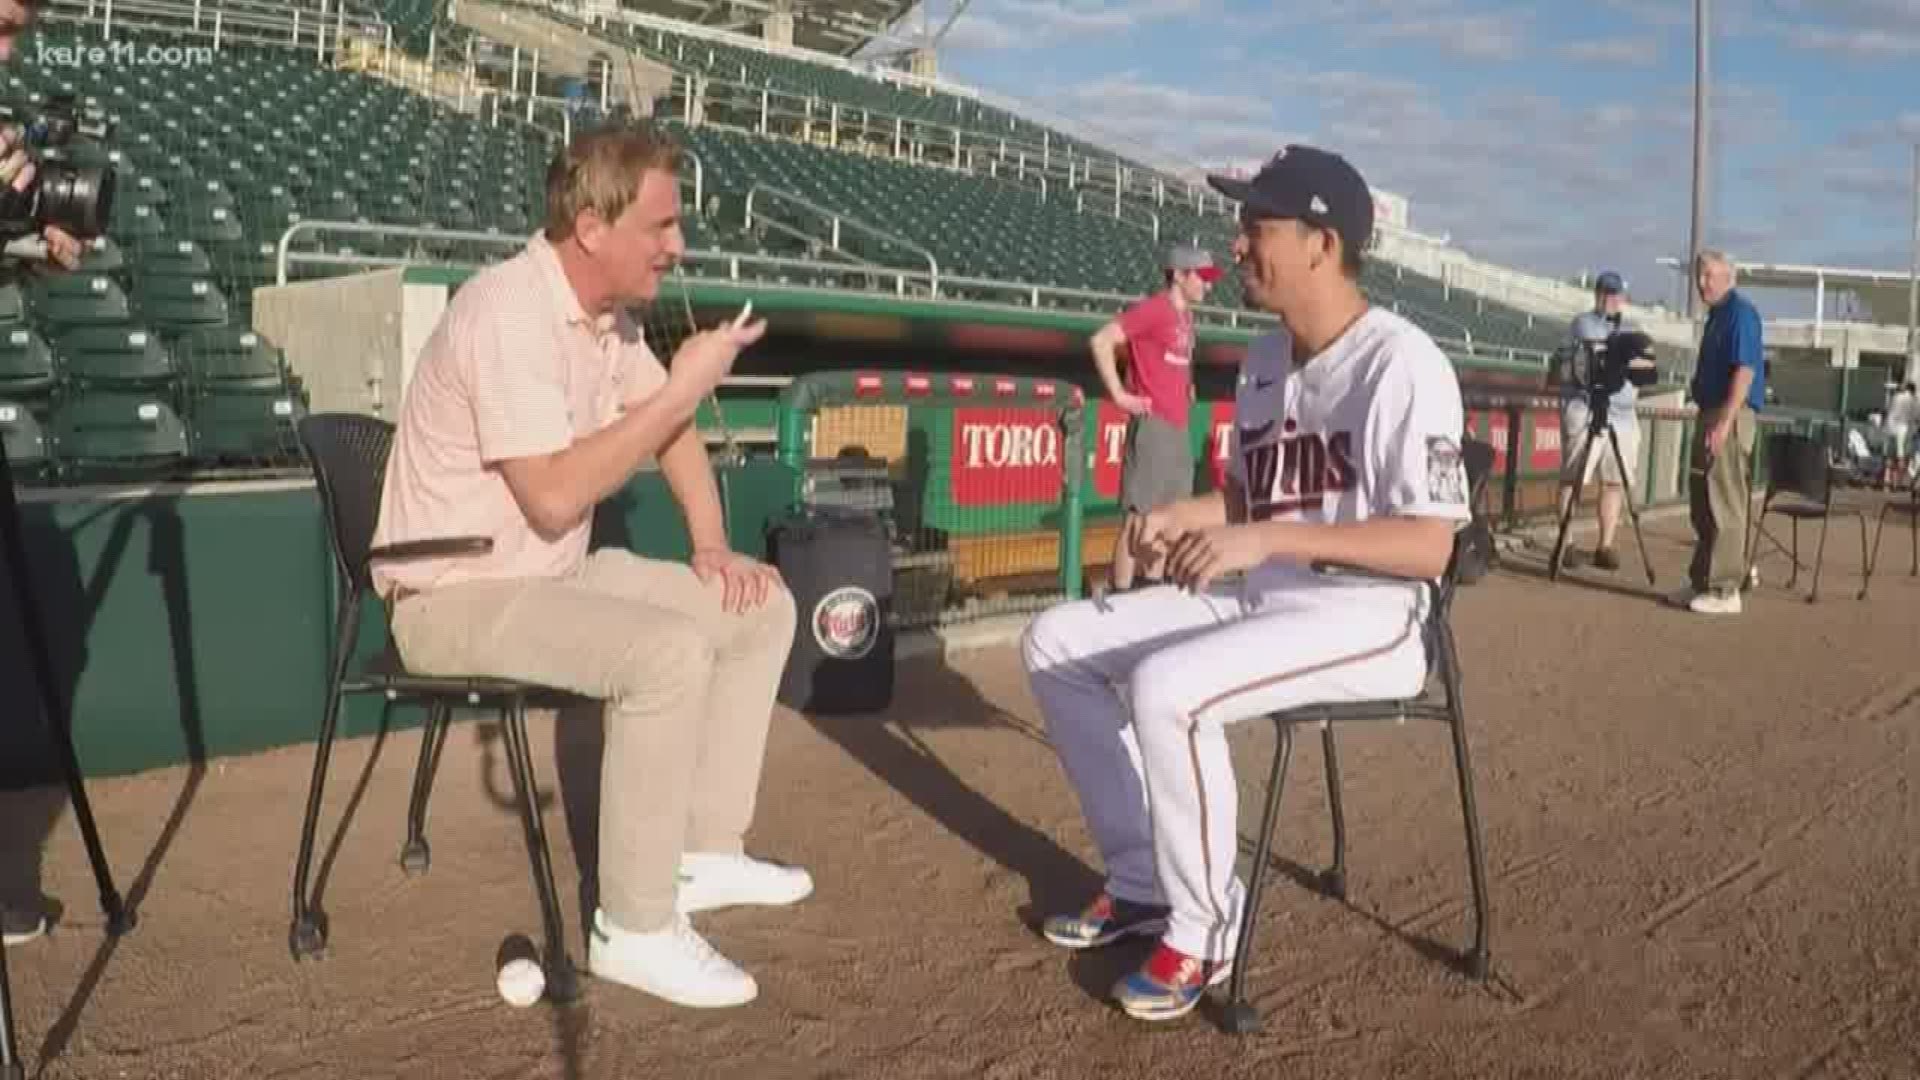 Utilizing a cutting edge piece of translating  technology KARE 11 Sports Director Eric Perkins is able to break down the language barrier and talk to Maeda.